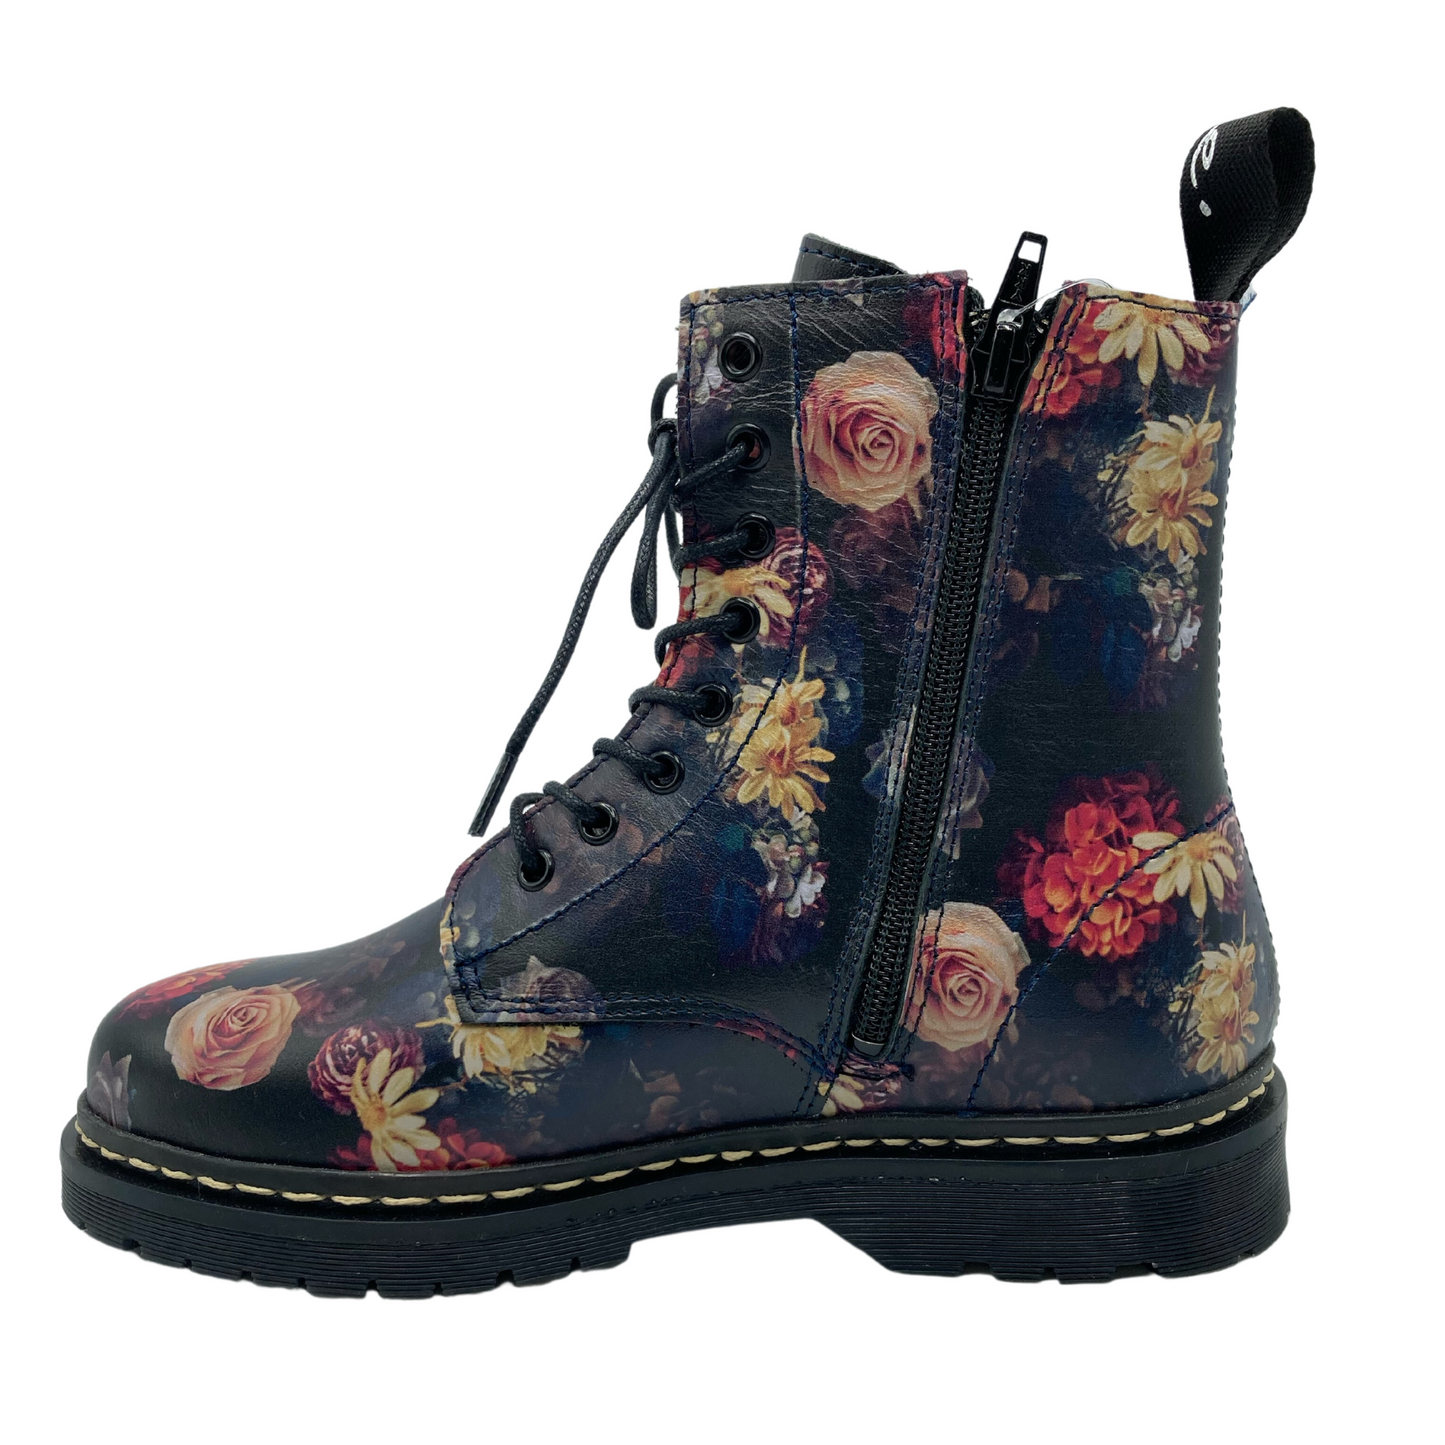 Left facing view of floral combat boot with side zipper closure and black outsole